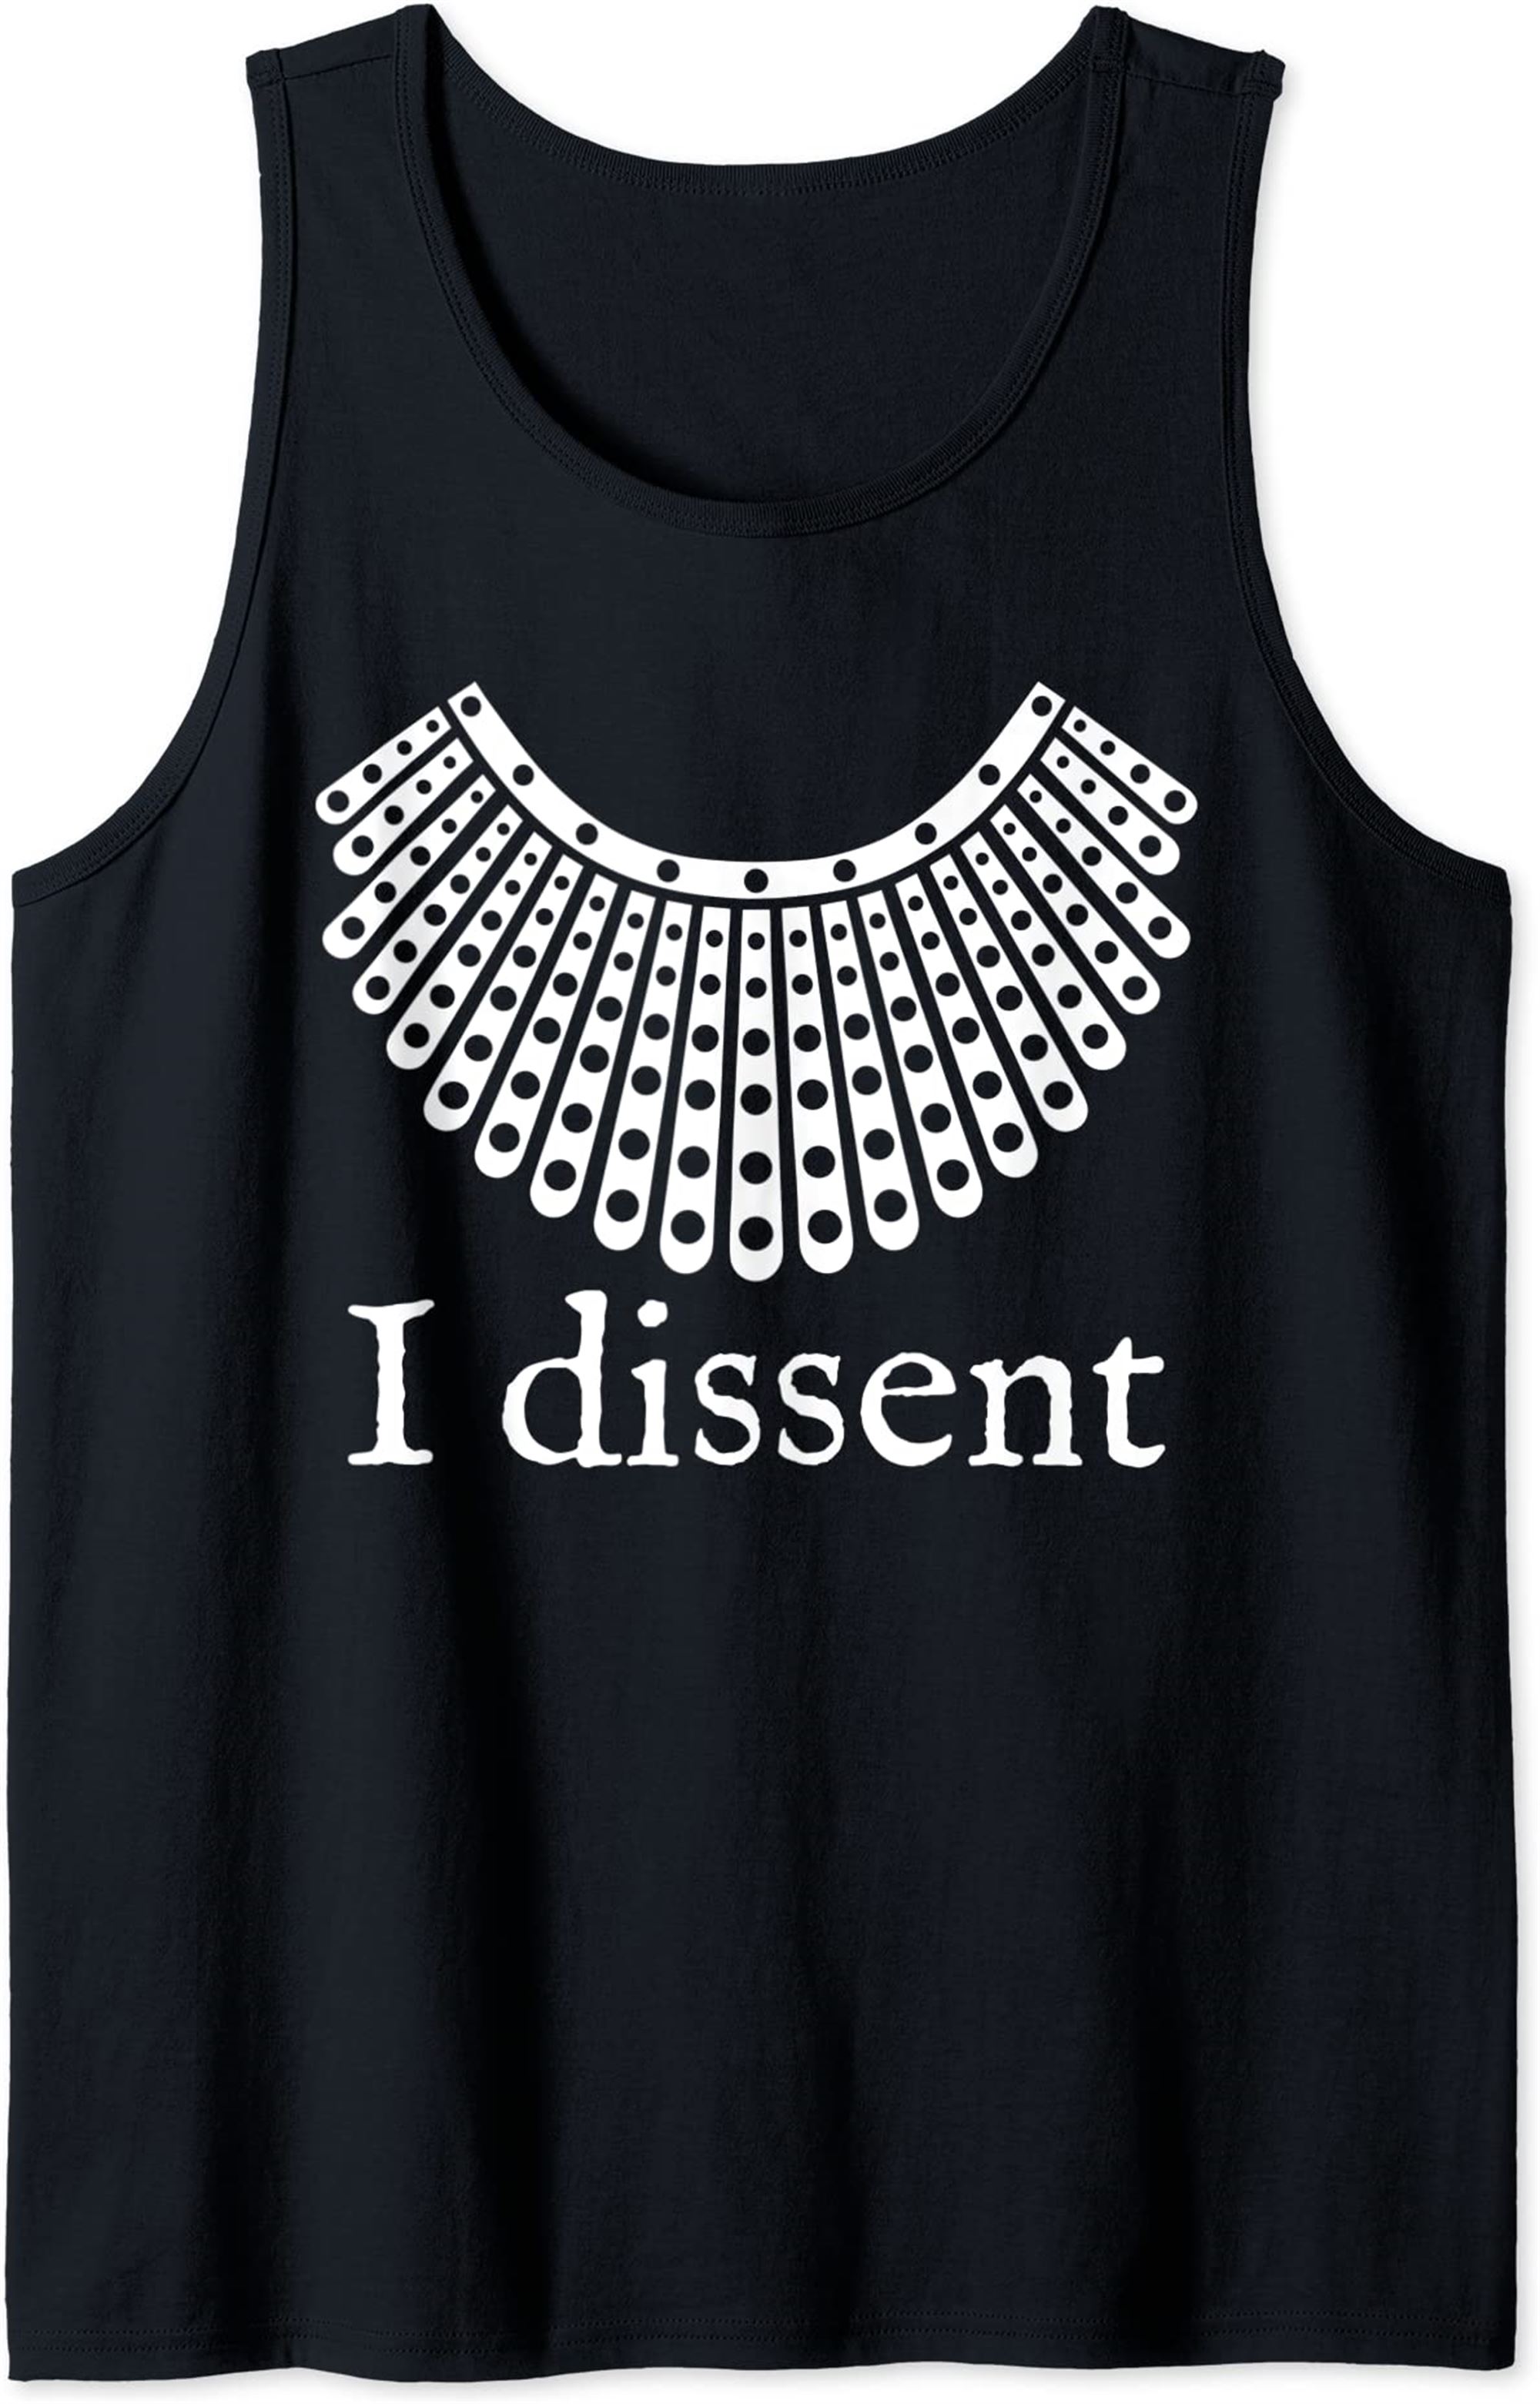 I Dissent Shirt I Dissent Collar Rbg For Women I Dissent Tank Top Full Size Up To 5xl